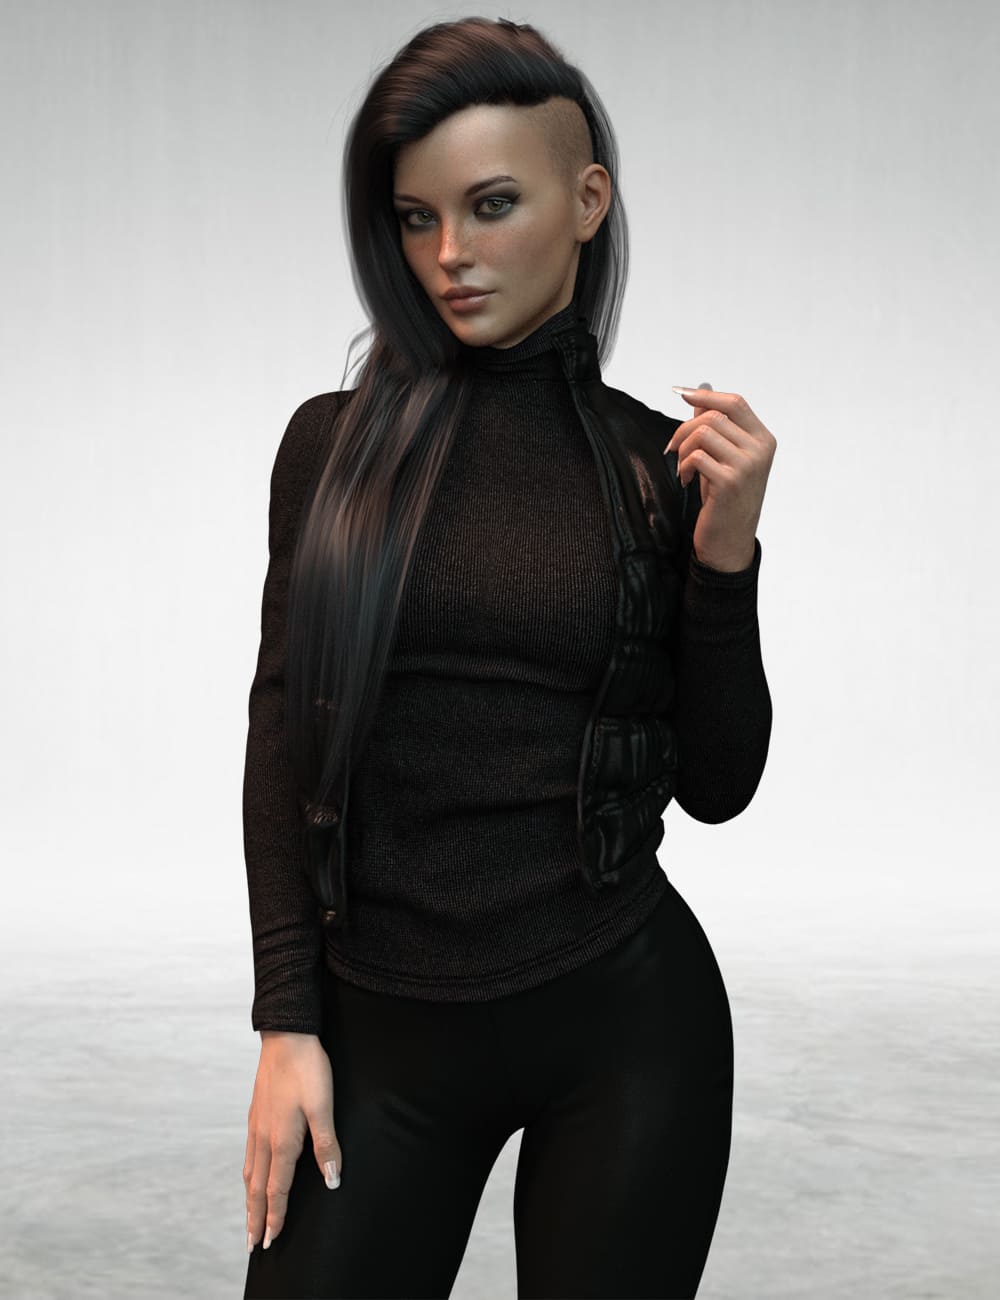 X-Fashion Autumn Winter Outfit for Genesis 8 Females_DAZ3D下载站